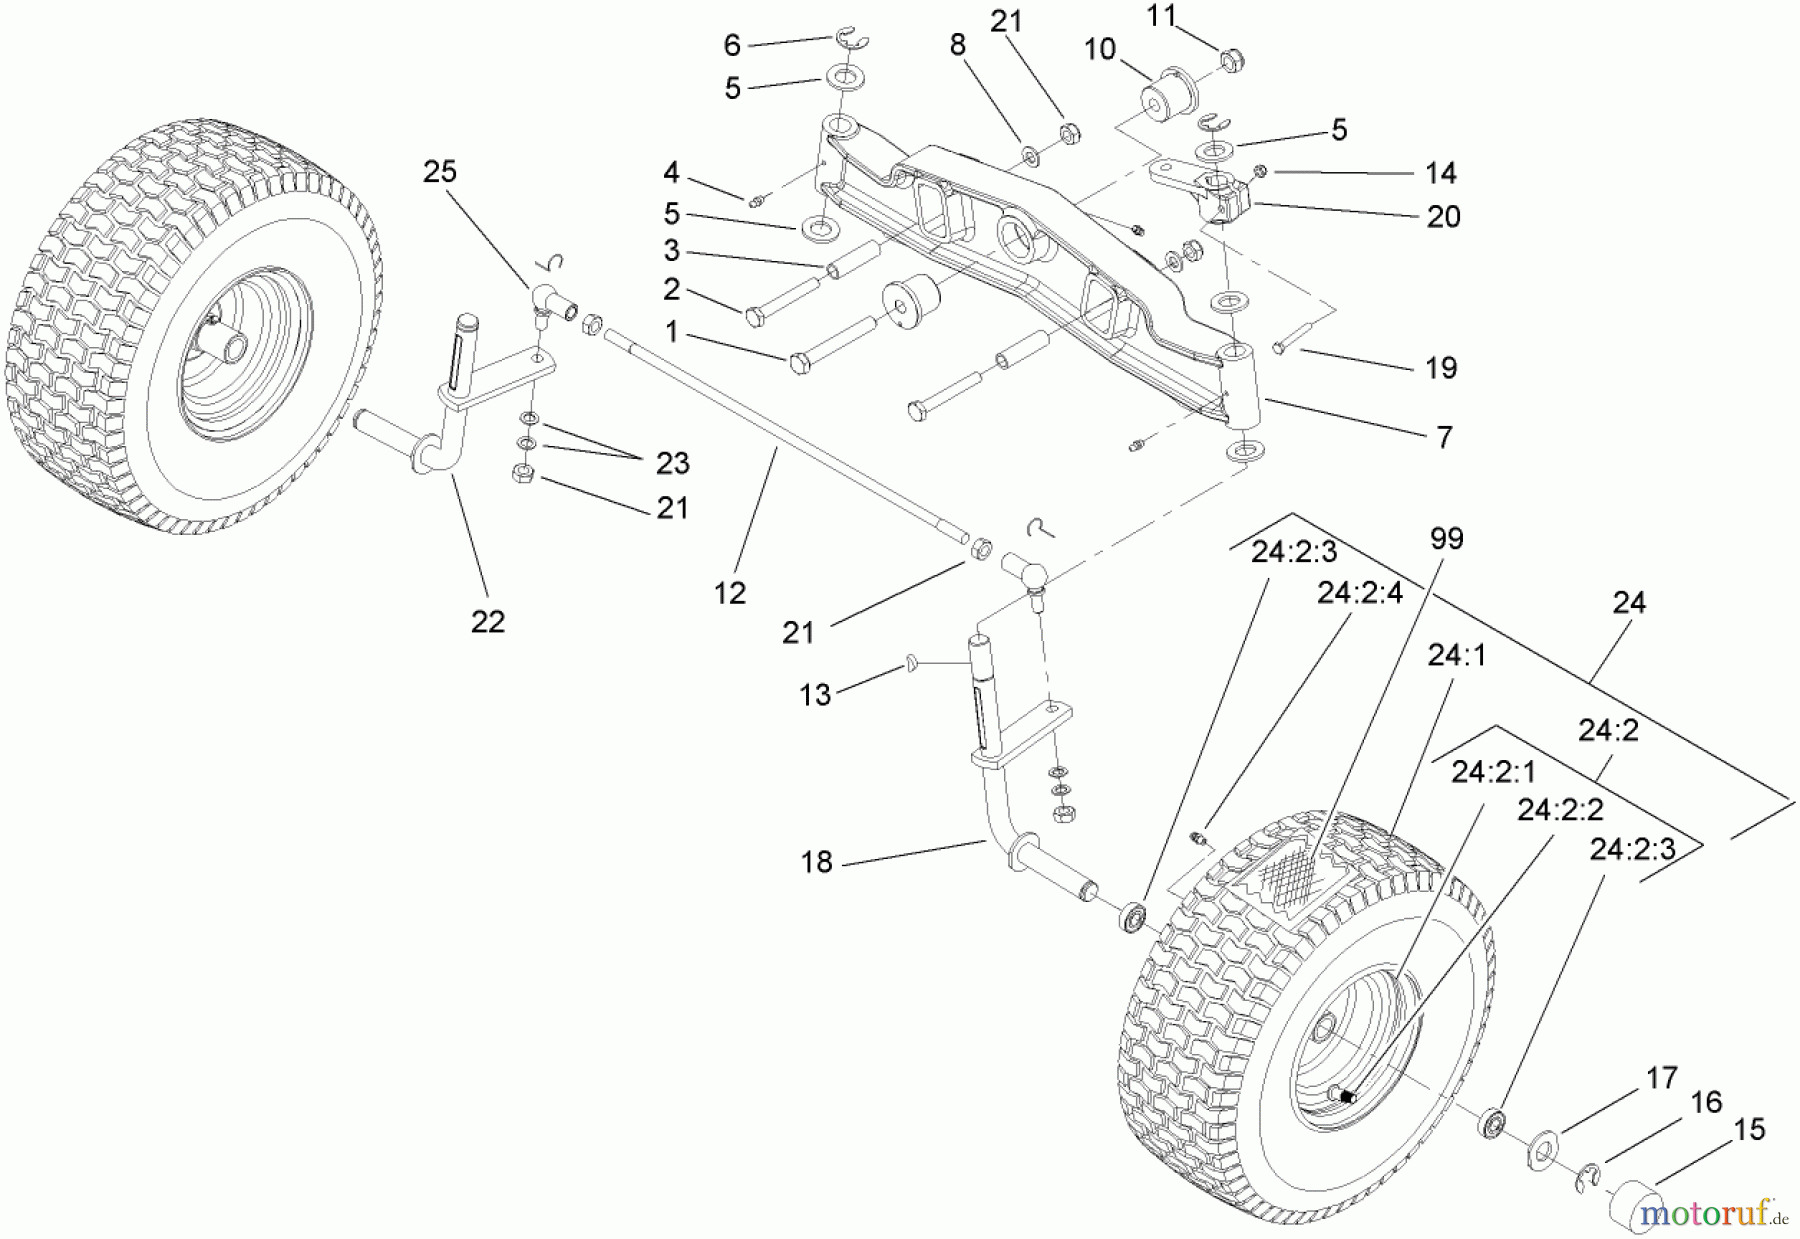  Toro Neu Mowers, Lawn & Garden Tractor Seite 1 74570 (DH 210) - Toro DH 210 Lawn Tractor, 2006 (260000001-260999999) FRONT AXLE ASSEMBLY